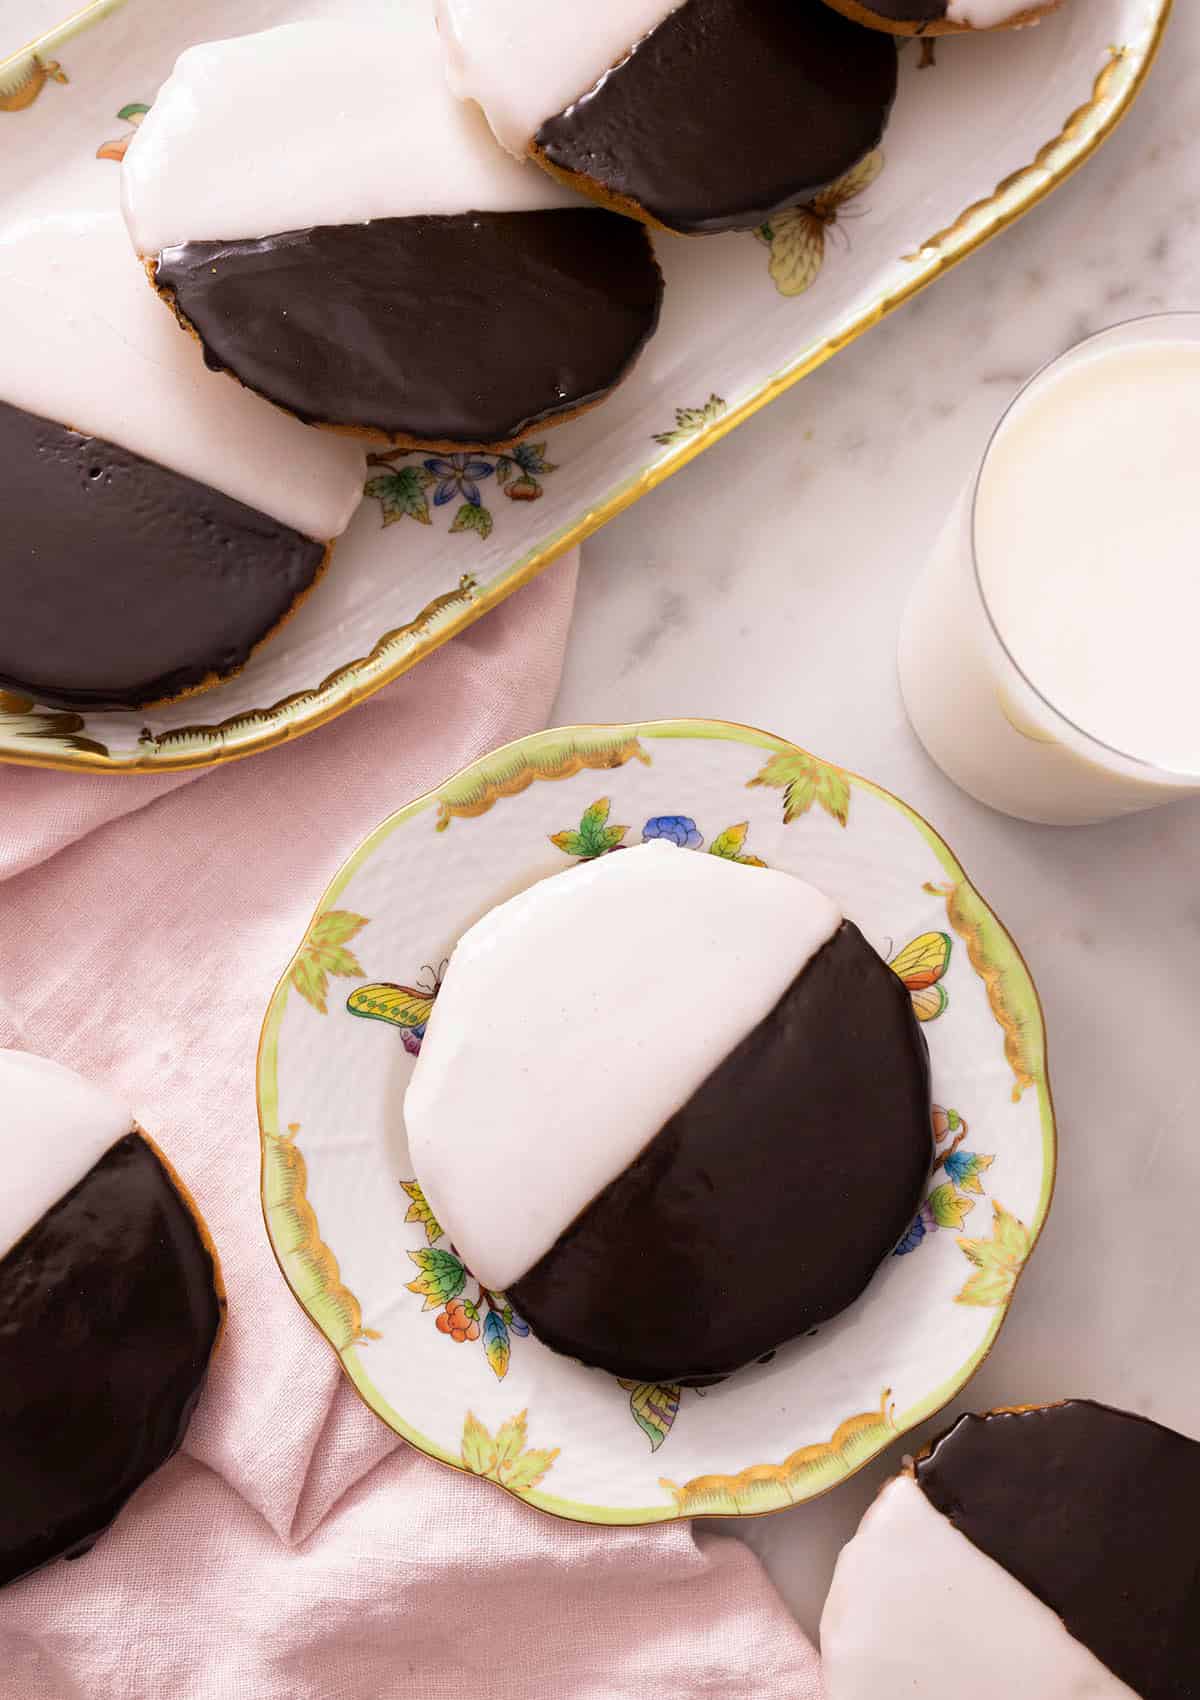 Overhead view of multiple black and white cookies with one in a plate beside a glass of milk.